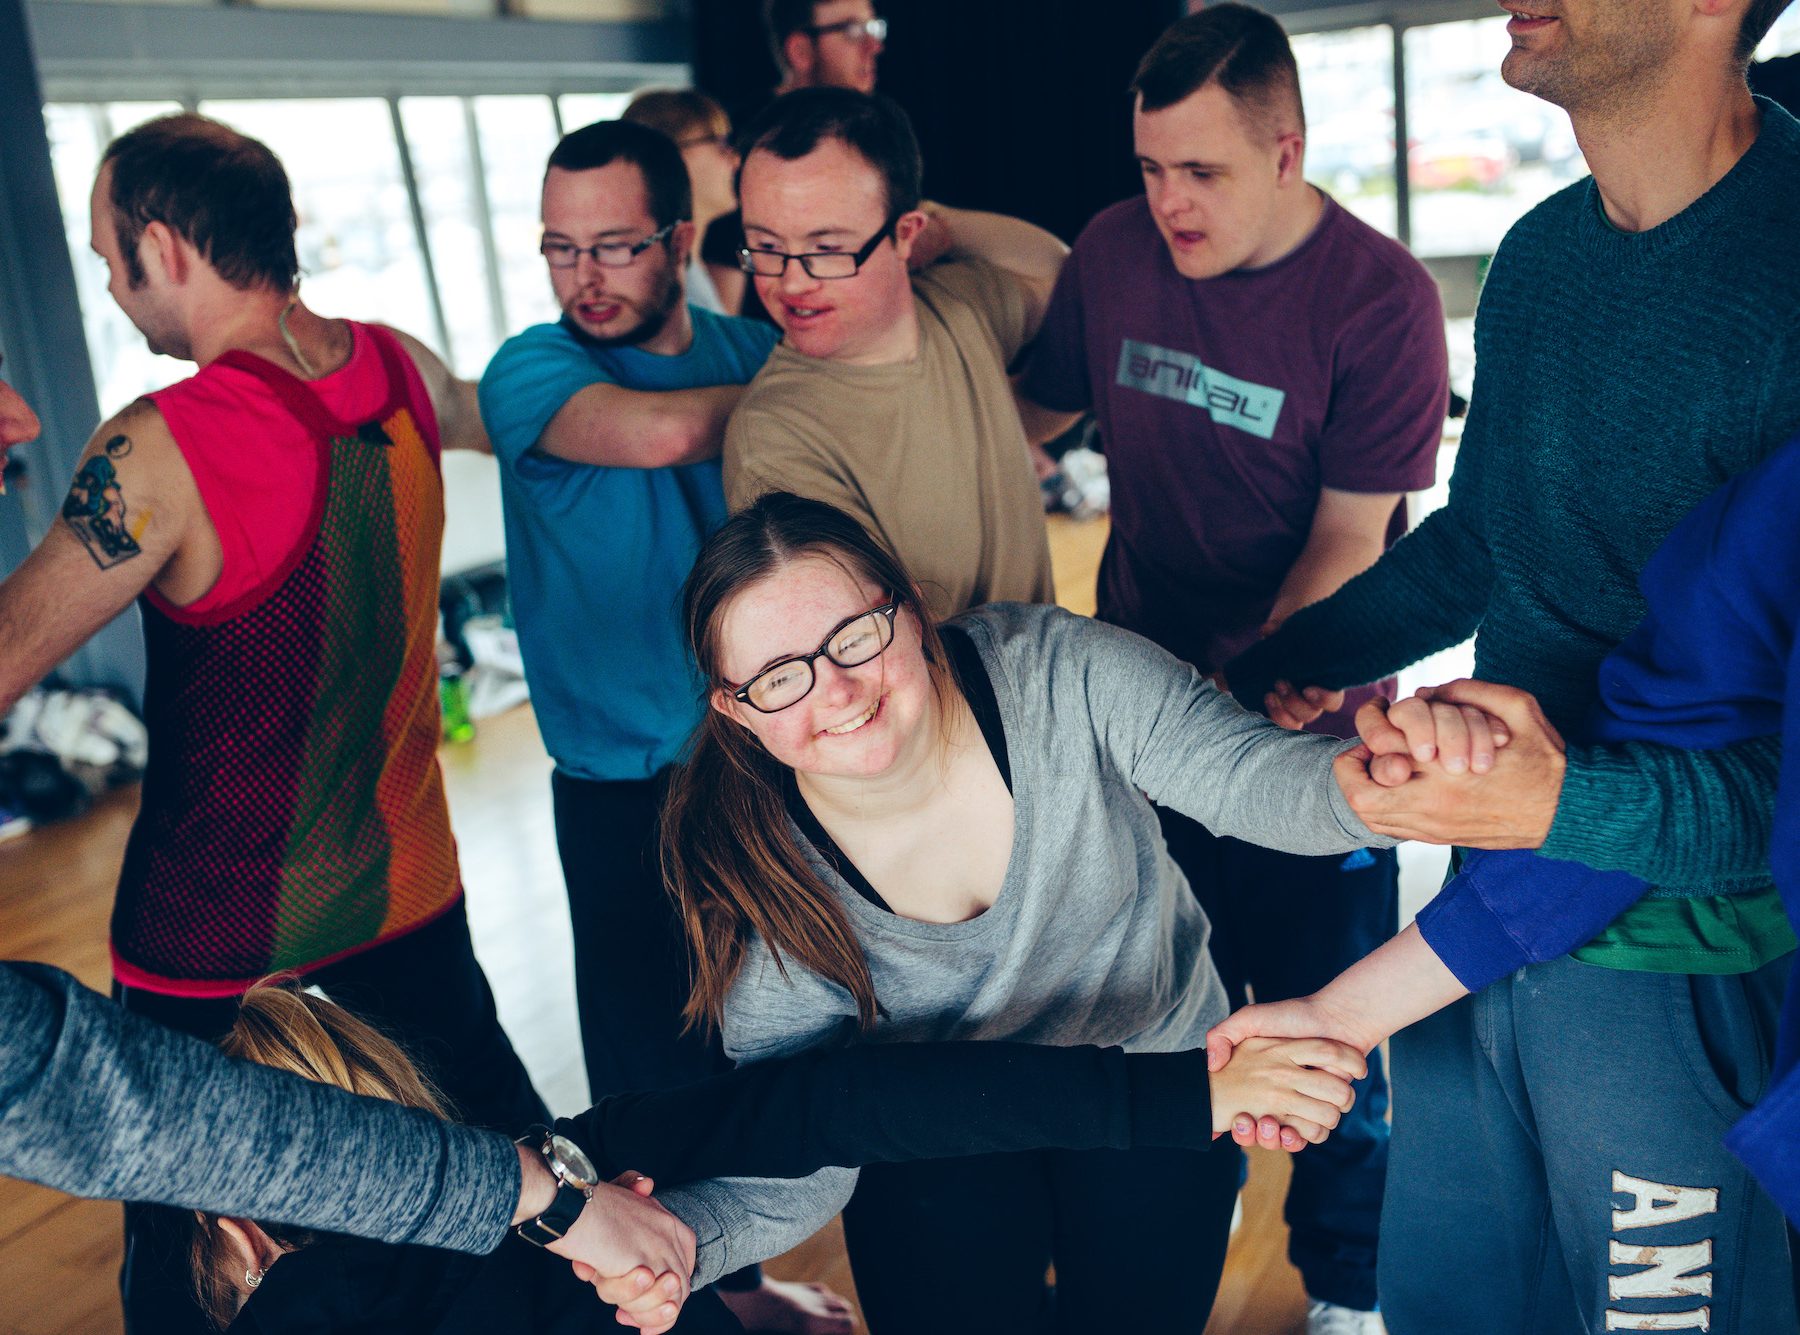 A group of young people are tangled in a group, holding hands, with arms intertwined. A young girl with Jess, a young girl with Downs Syndrome is at the front of the group, beaming with a big smile.